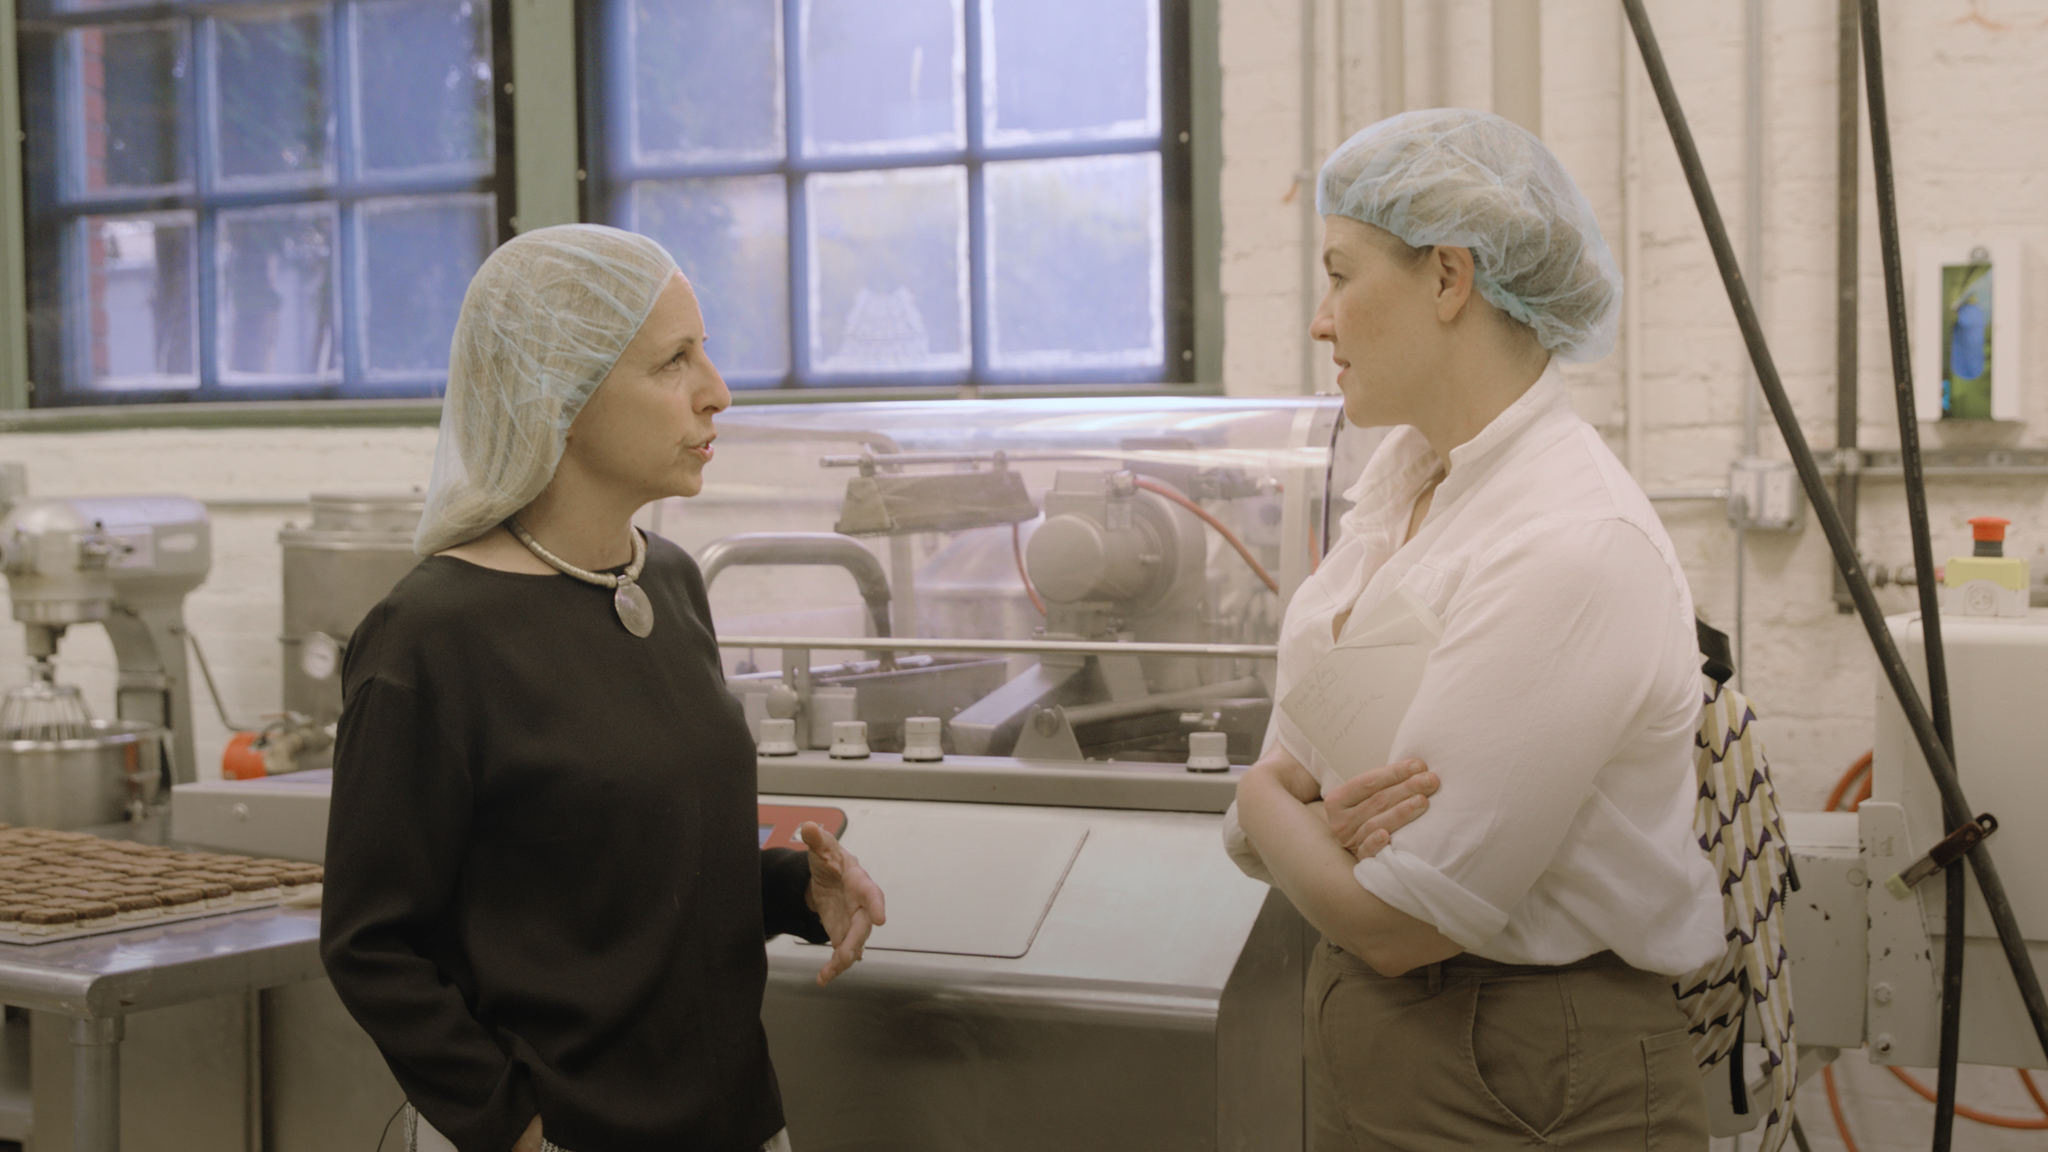 jeni in a hairnet talking to another woman